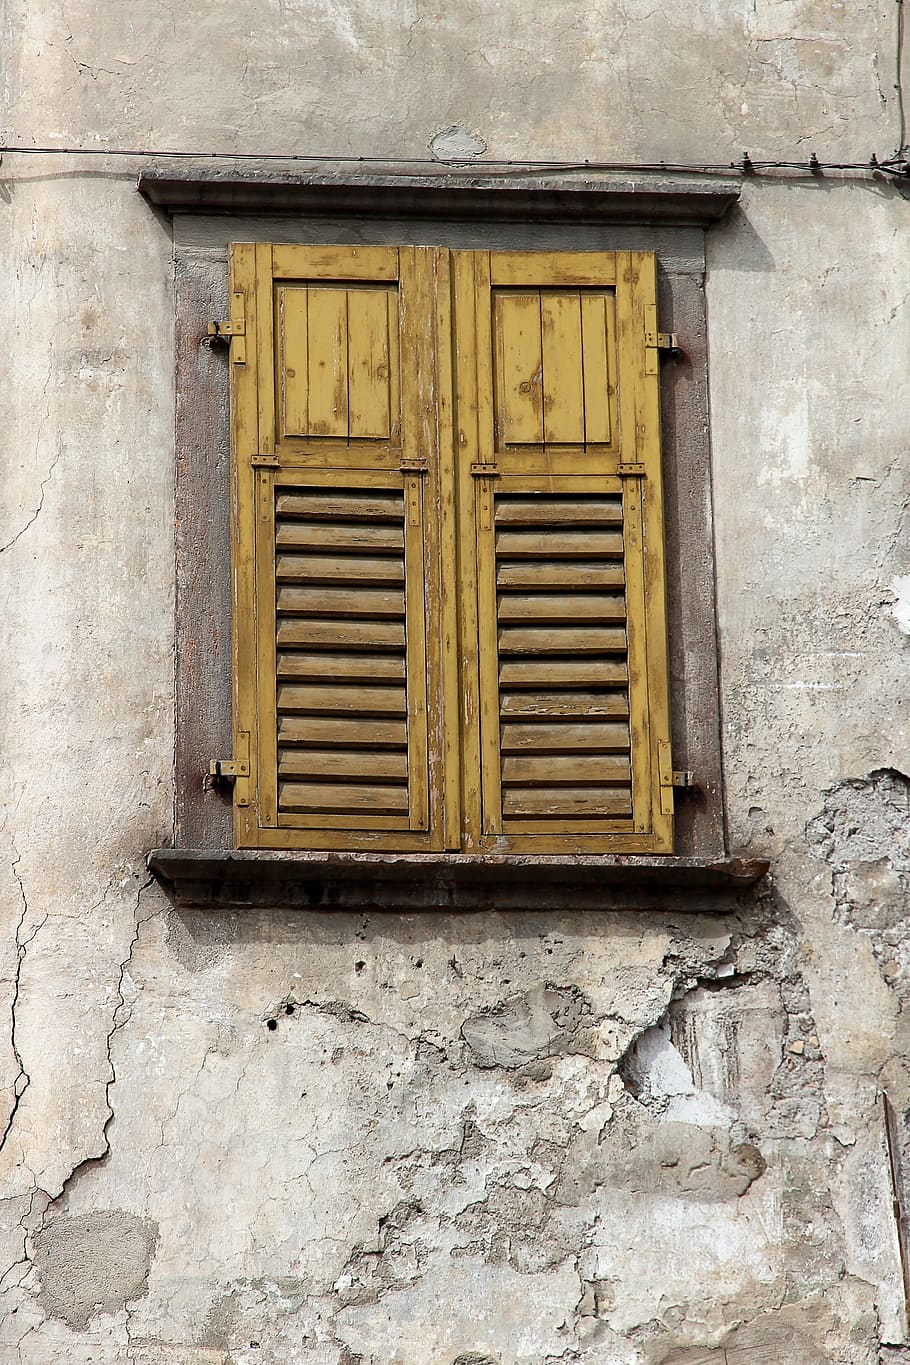 window, old, old window, facade, historically, weathered, wood, glass, break up, building